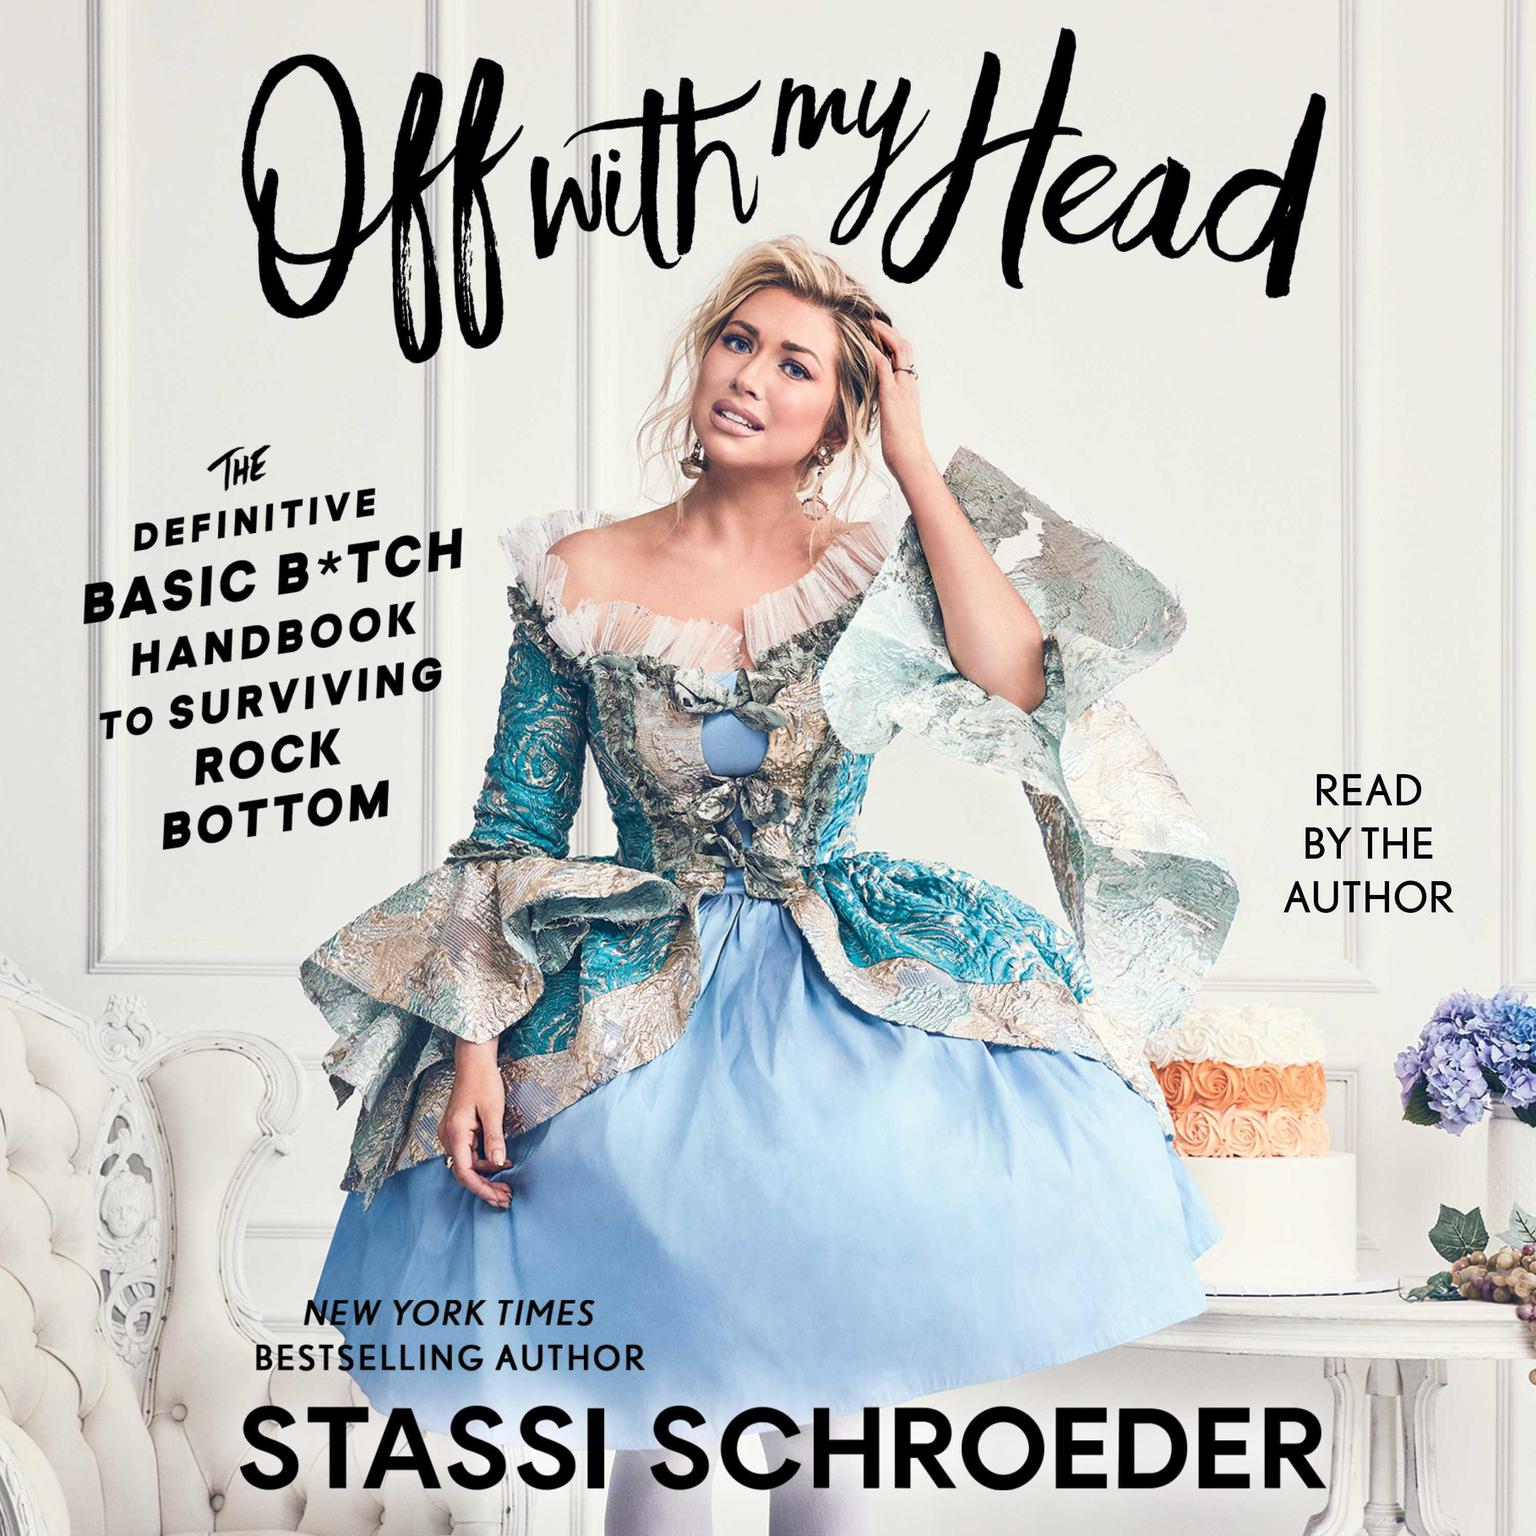 Off with My Head: The Definitive Basic B*tch Handbook to Surviving Rock Bottom Audiobook, by Stassi Schroeder